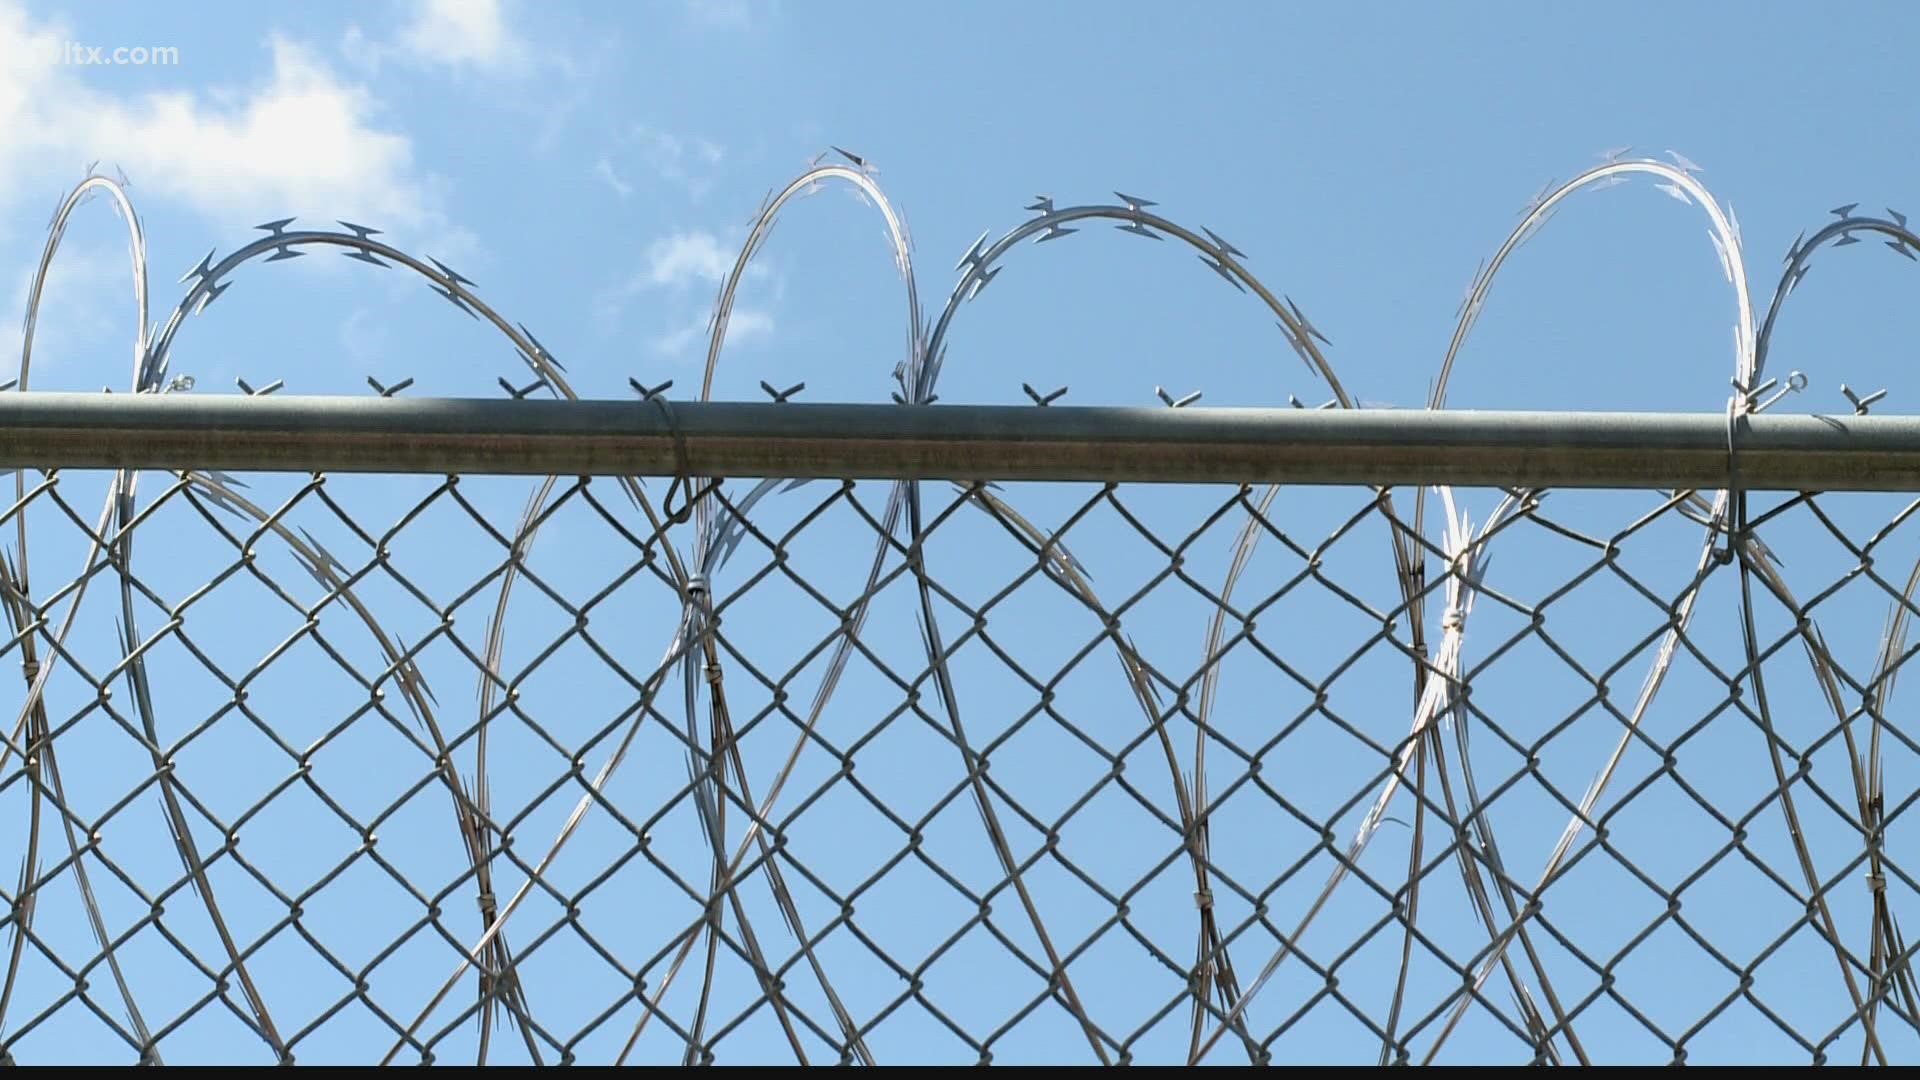 Richland County Council is working to rewrite their per diem rate for individuals detained at the Richland County jail.